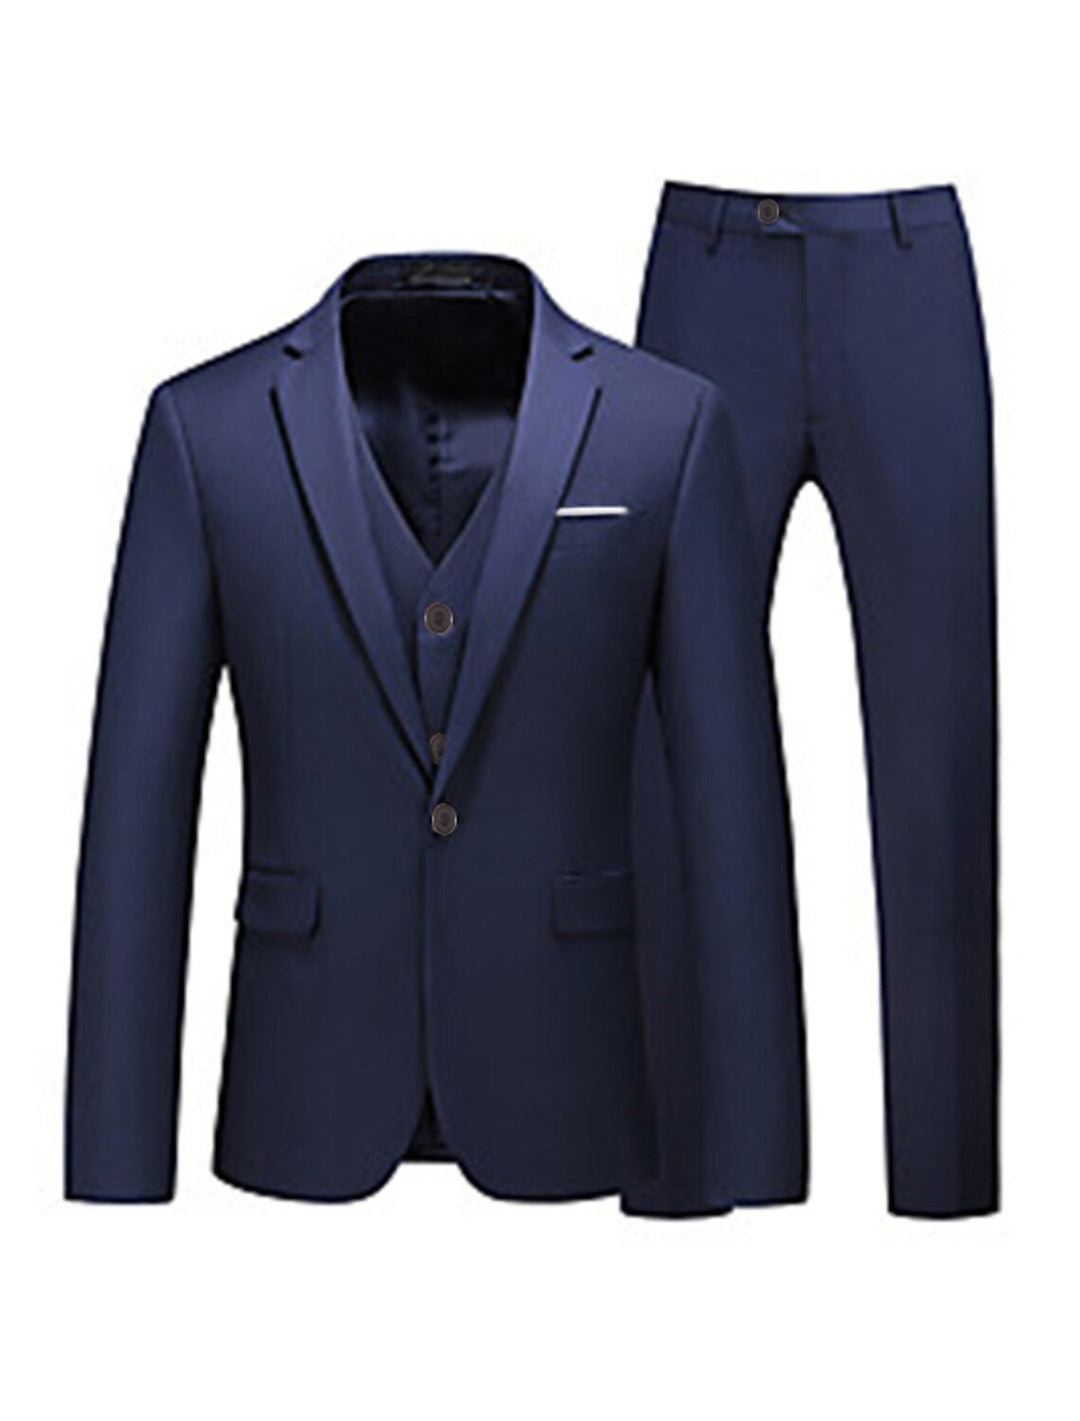 Pink Red Blue Yellow Men's Tailored Fit 3 Pieces Solid Colored Single Breasted One-button Party Suits